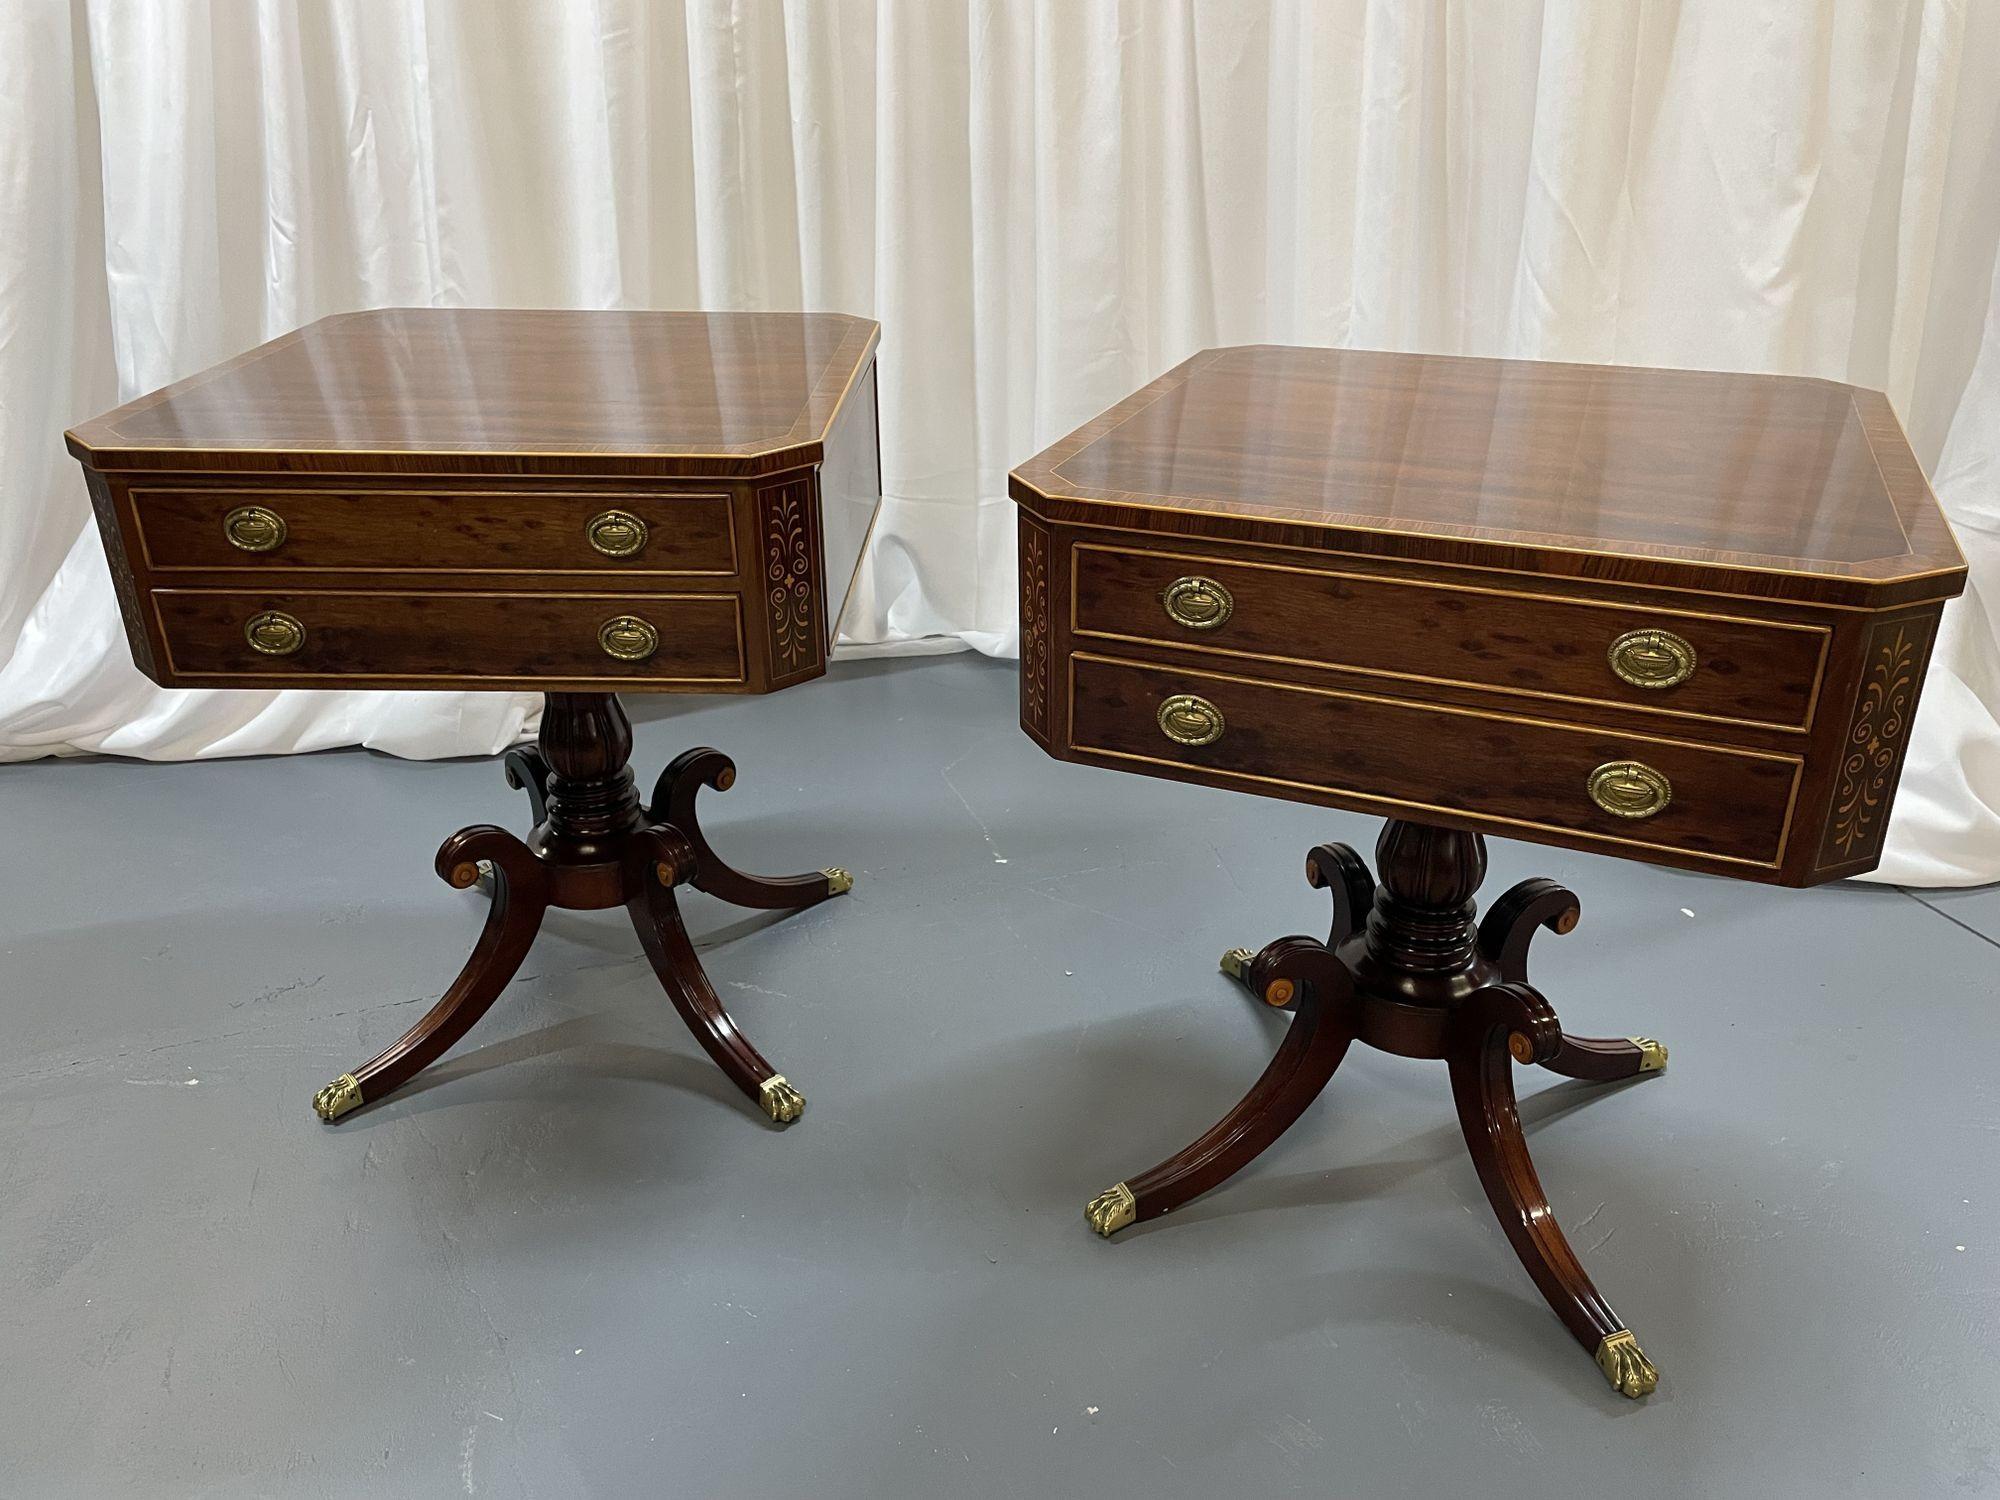 Pair Schmieg and Kotzian Satinwood and Flame mahogany side / end tables

Schmieg and Kotzian Pair of Tortoise Style Satinwood and Flame mahogany side or end tables each having two drawers in the front. Finished on all sides. On pedestal bases each